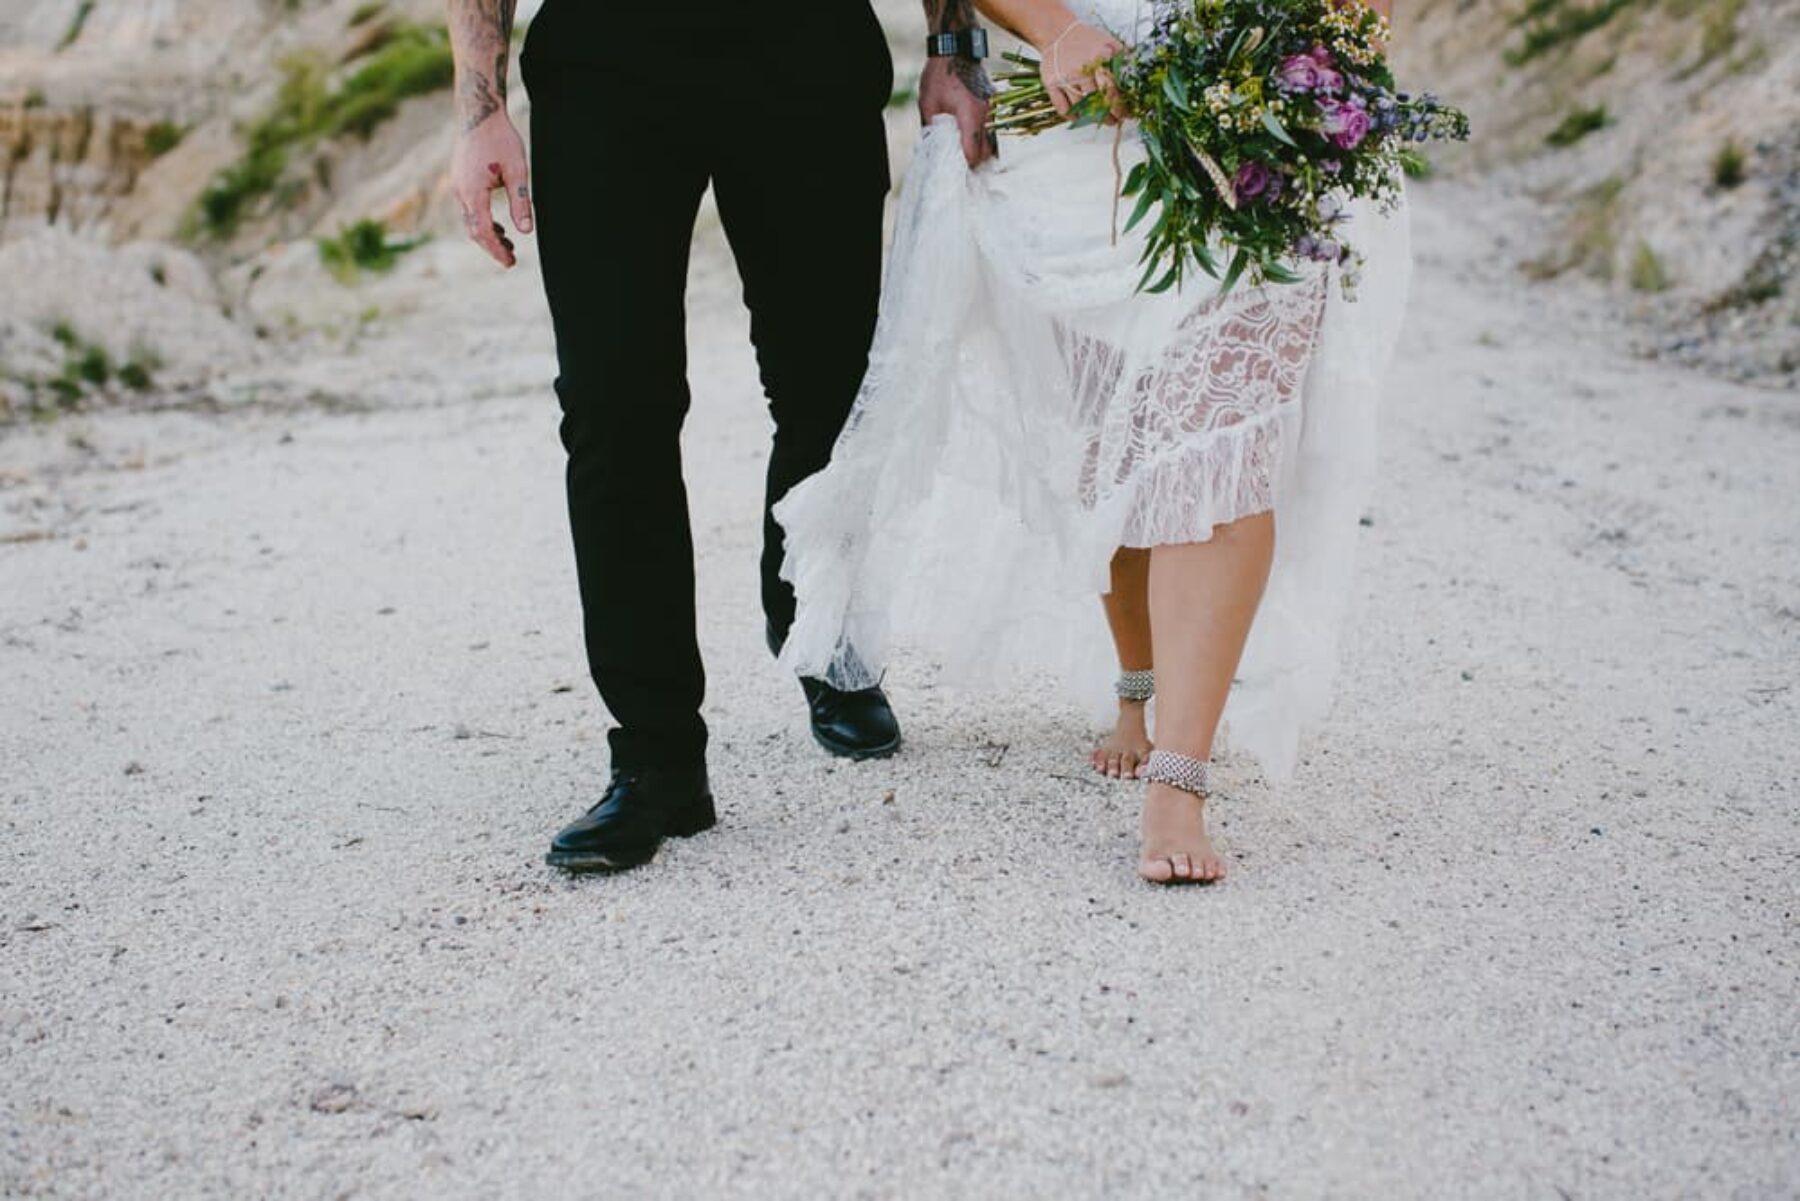 relaxed Byron Bay wedding fest - photography by Bonnie Jenkins